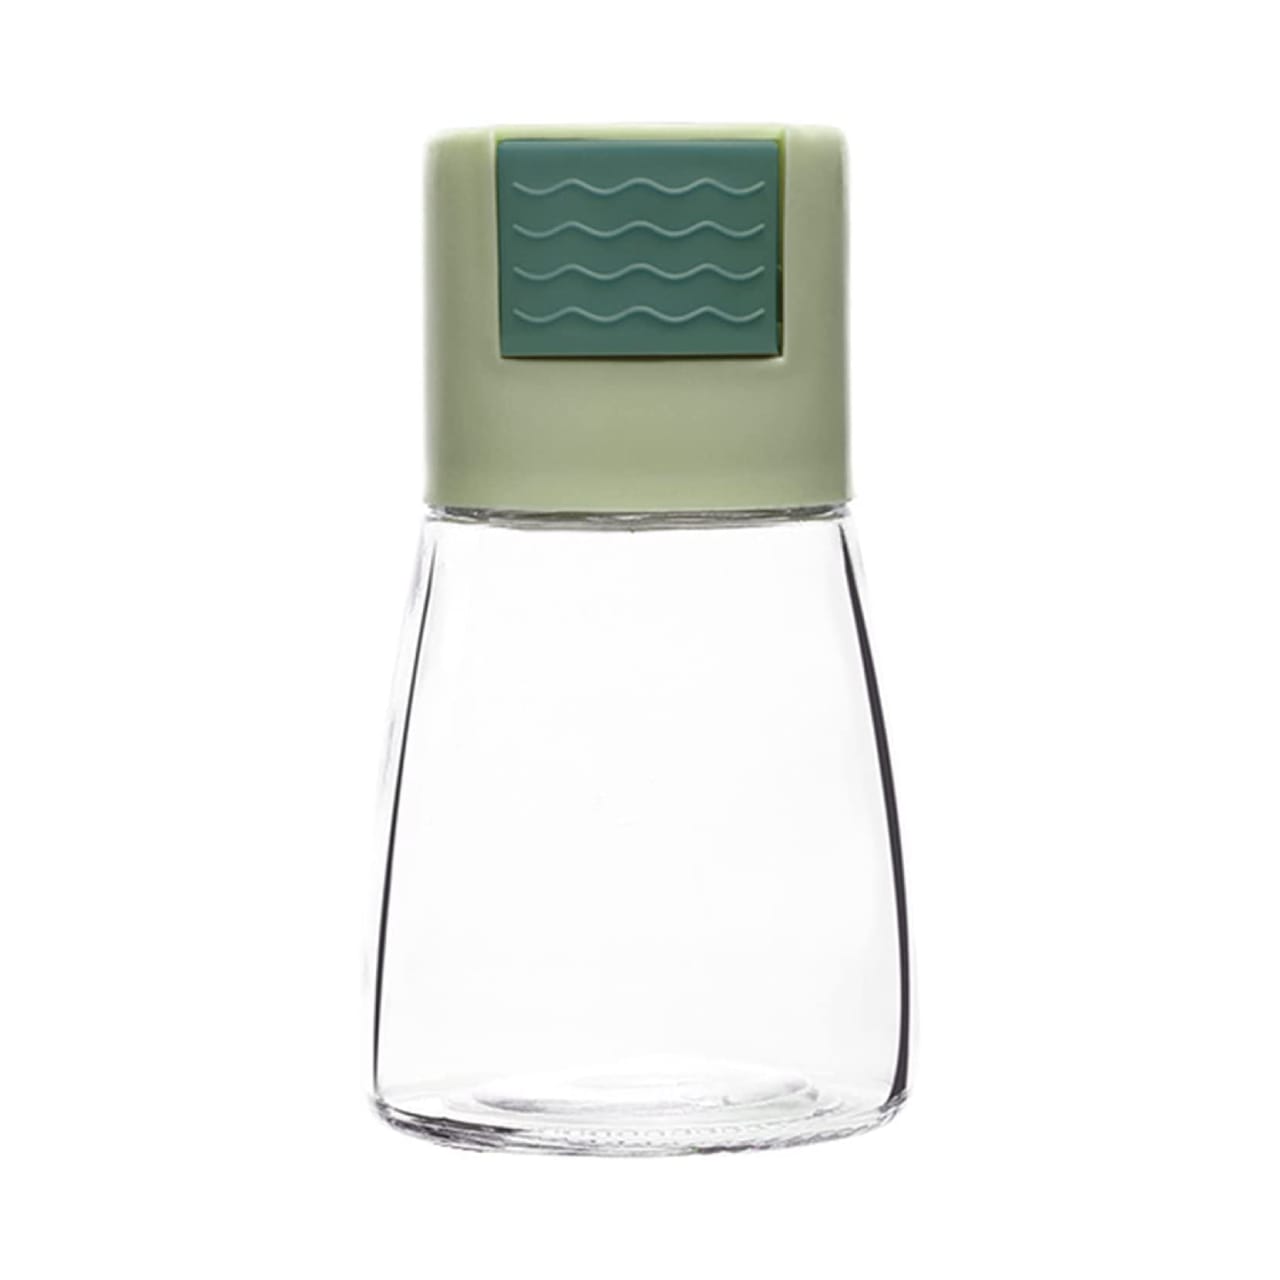 Someone using the Measurable Mini Salt Control Bottle in green color